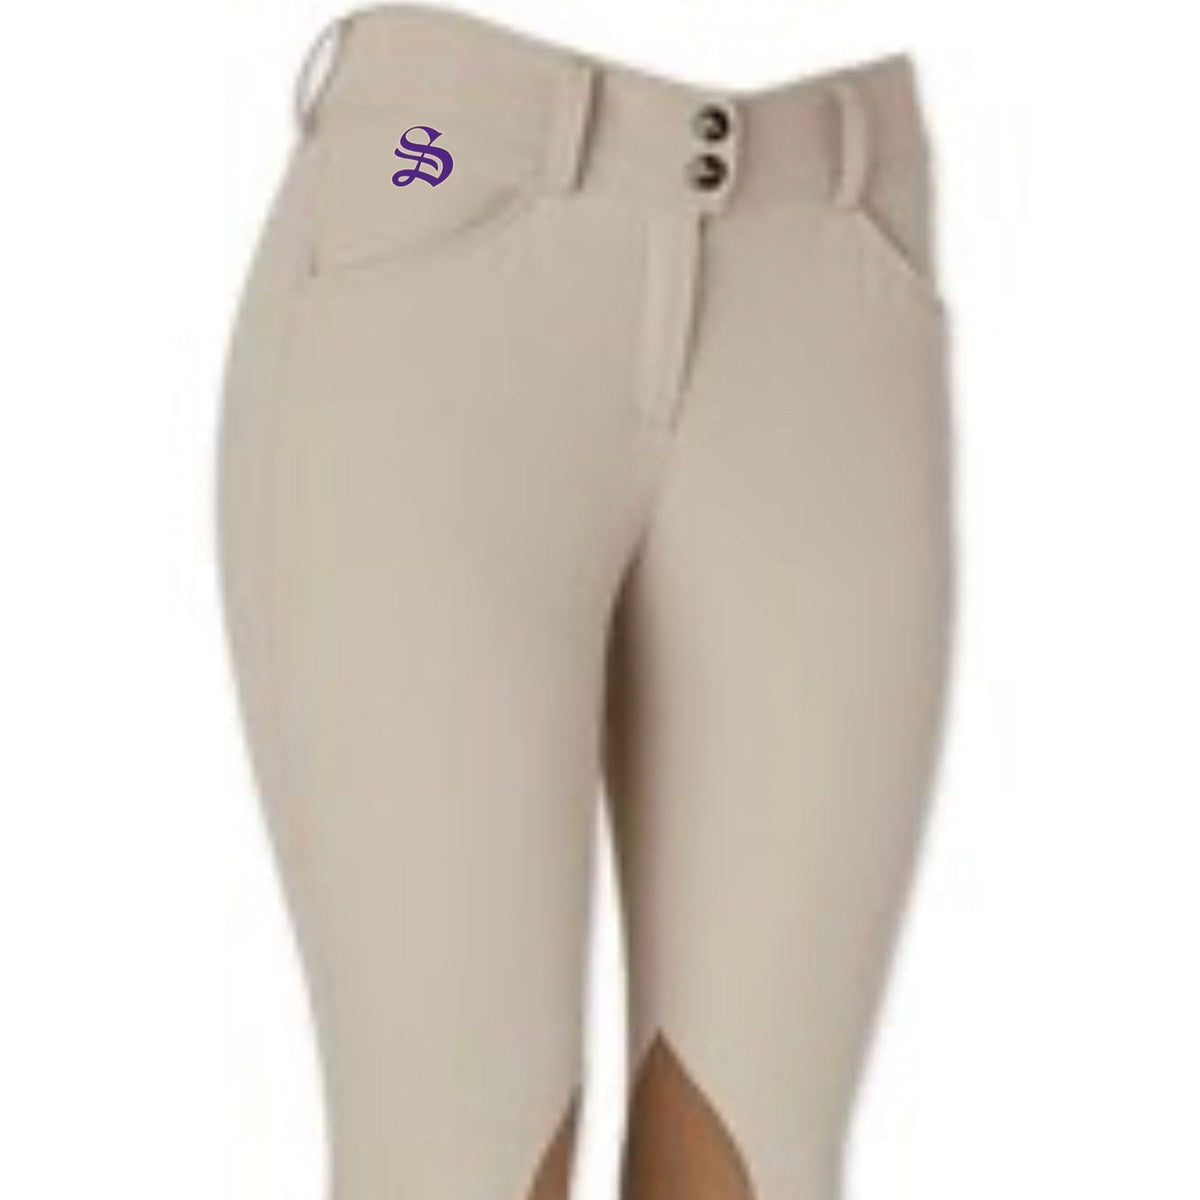 Equestrian Team Apparel Sewanee College Ladies Breeches equestrian team apparel online tack store mobile tack store custom farm apparel custom show stable clothing equestrian lifestyle horse show clothing riding clothes horses equestrian tack store